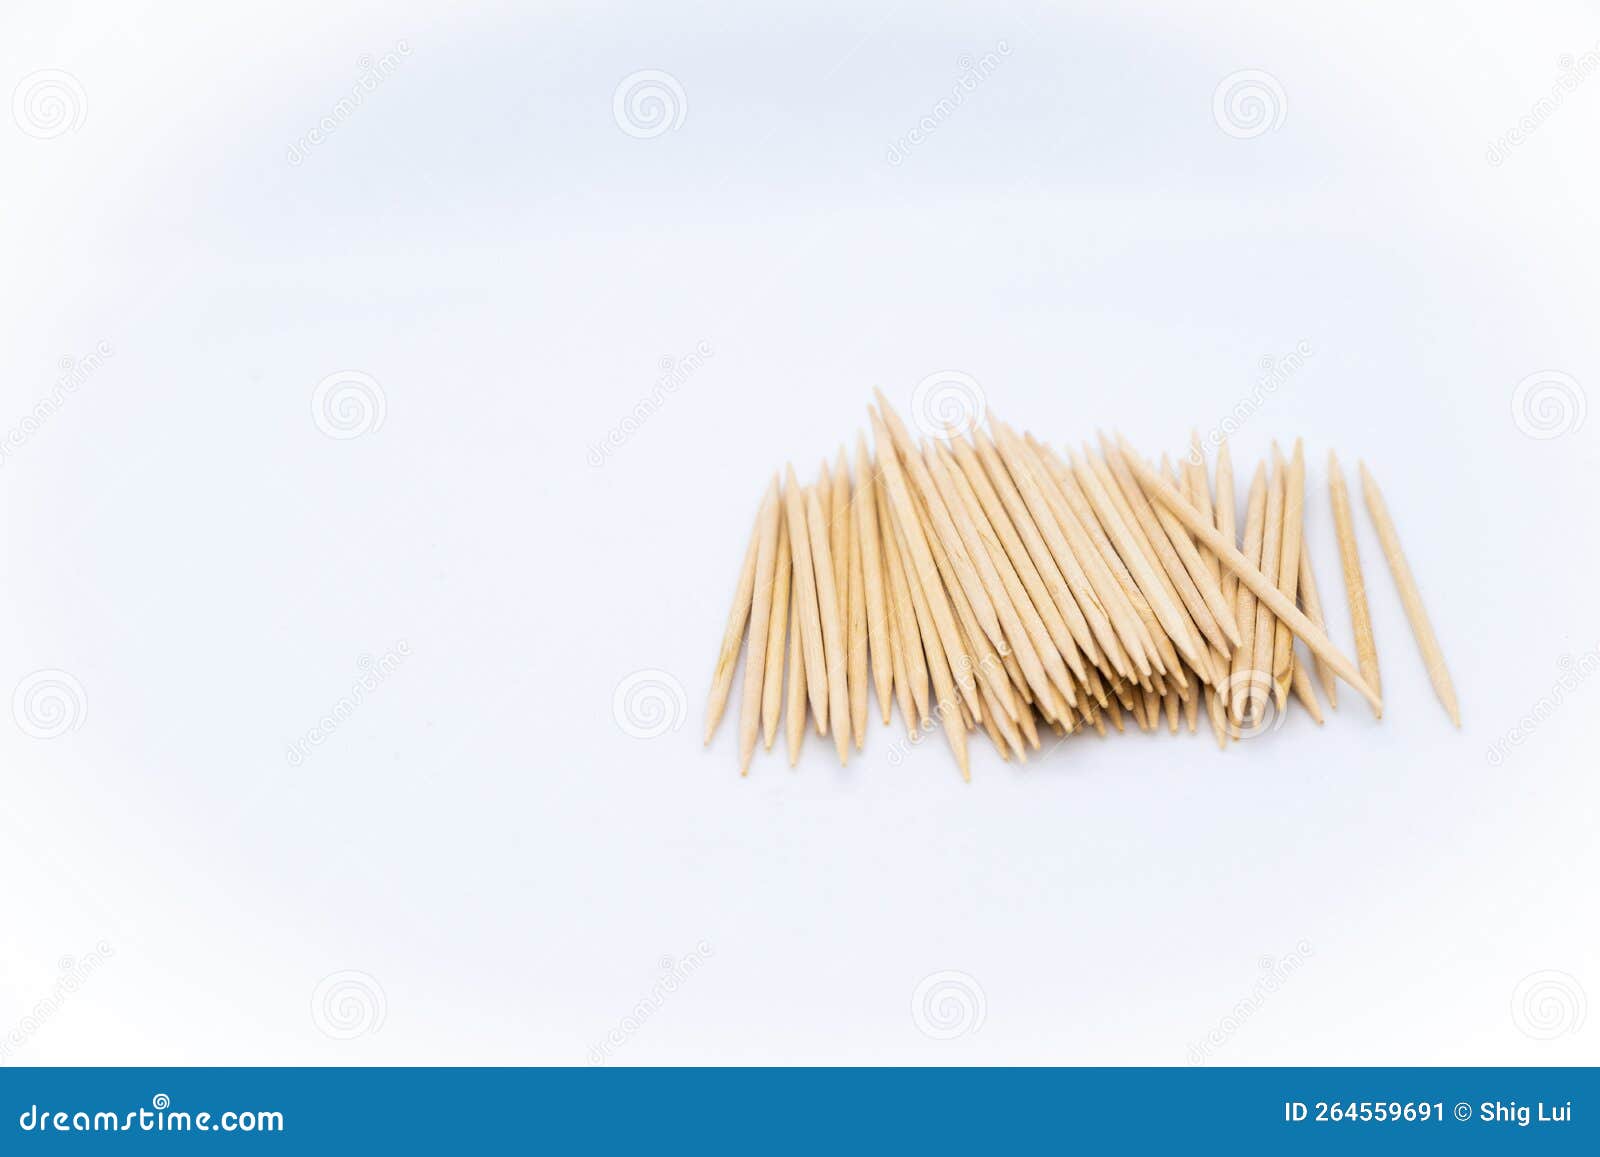 right-side toothpicks on white background